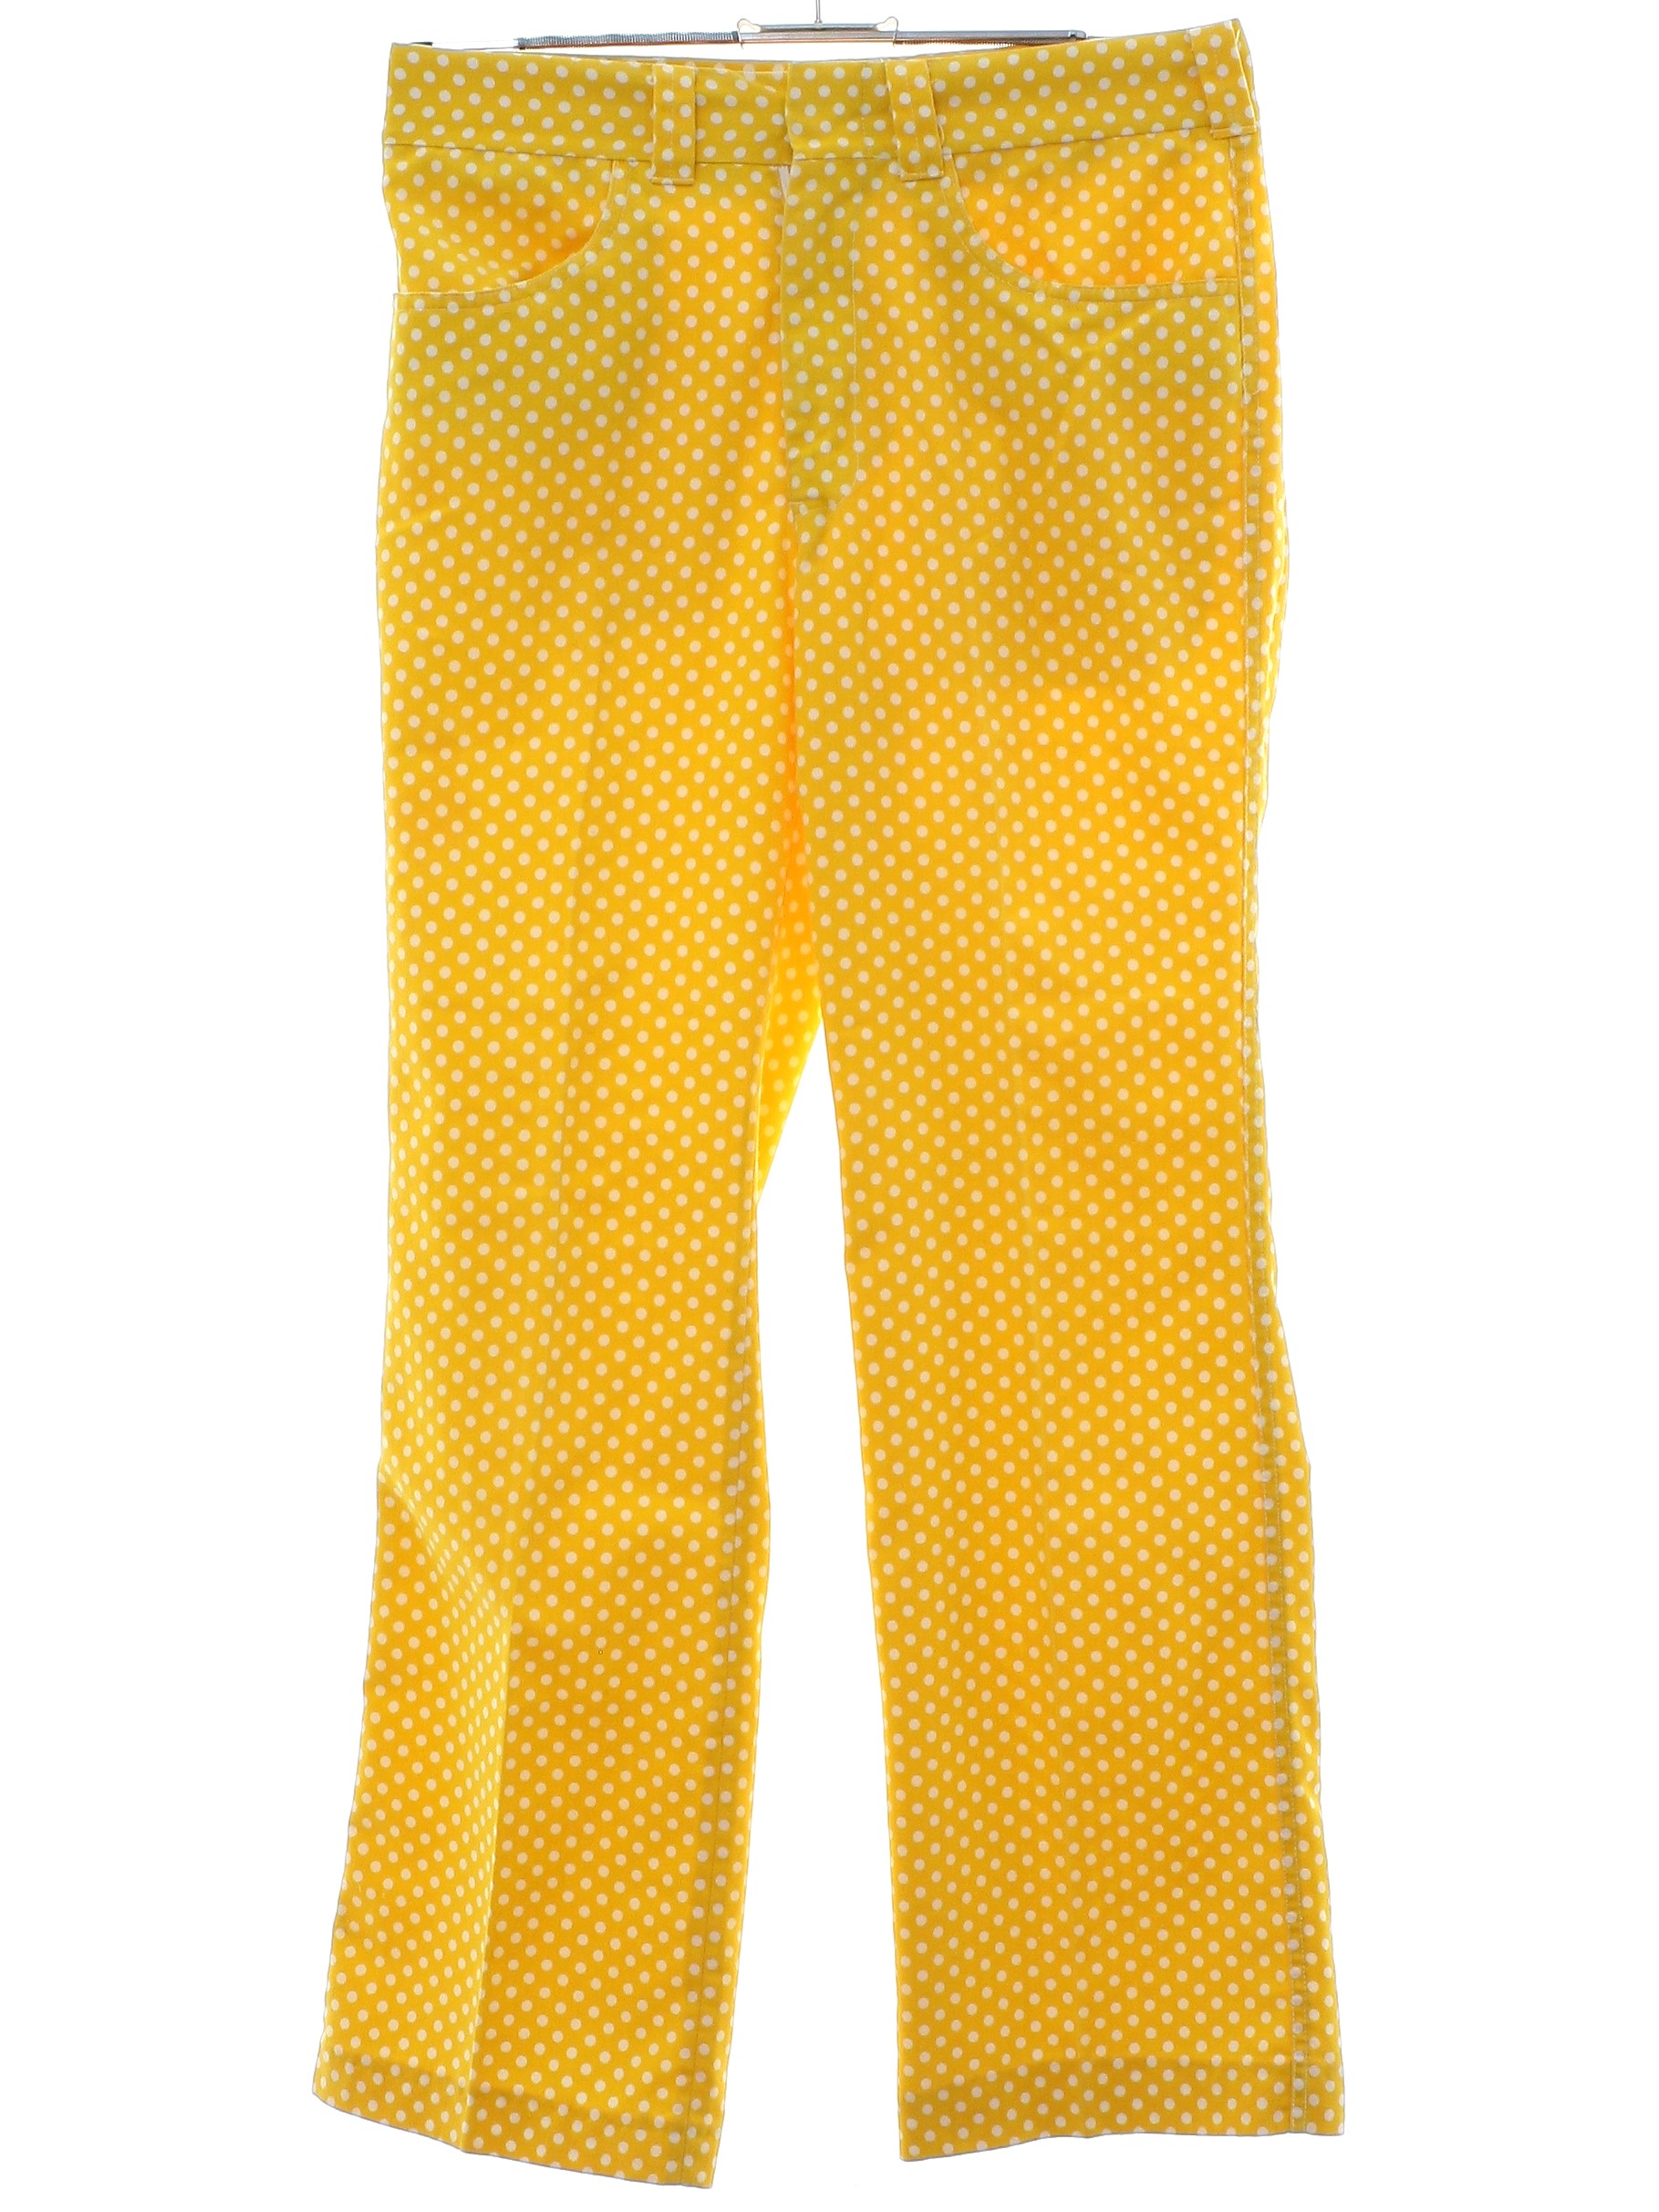 Vintage 60s Flared Pants / Flares: Late 60s -No Label- Mens egg yellow ...